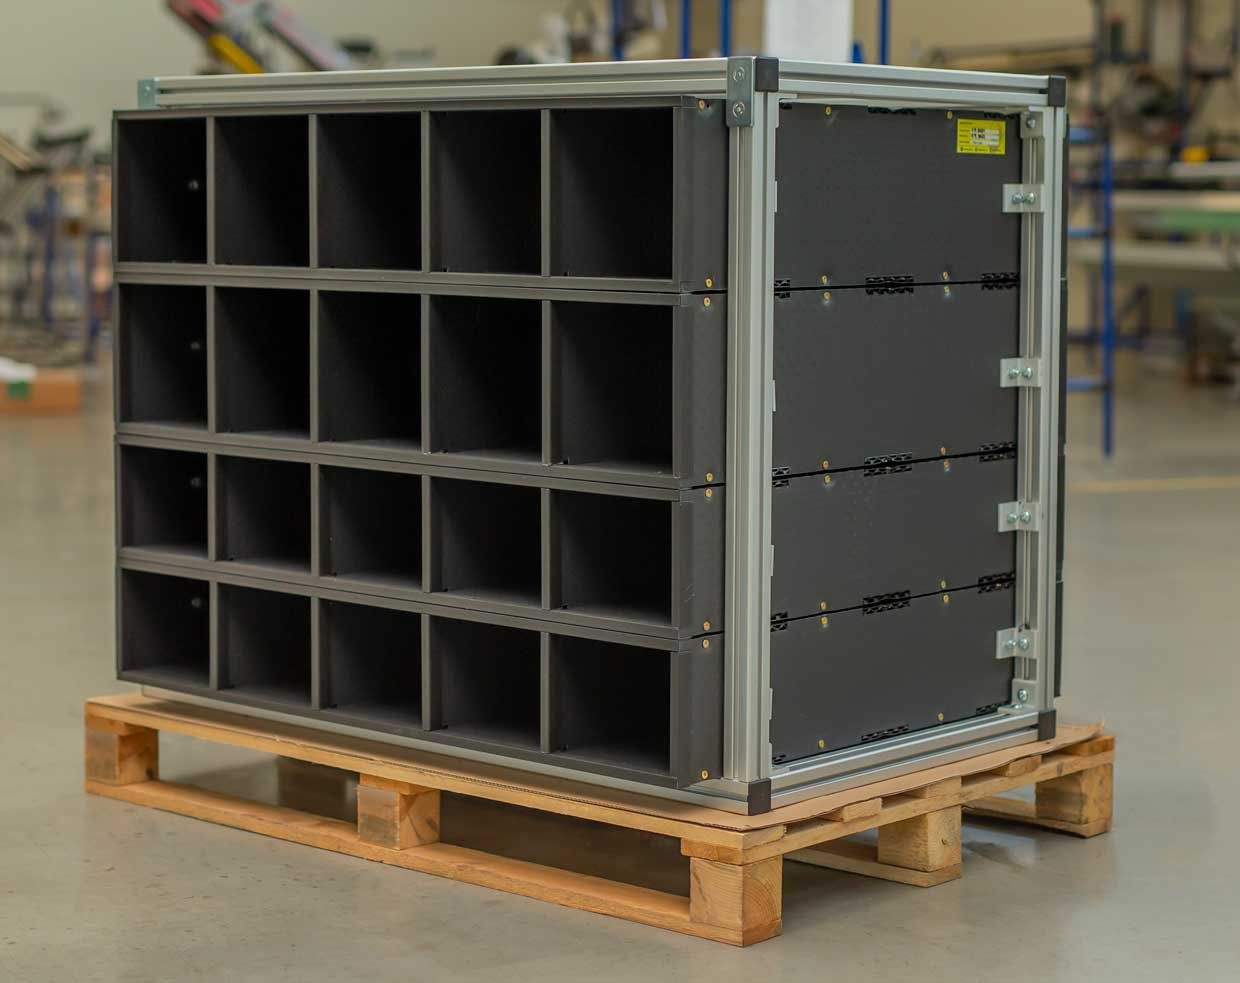 A shelf with a base frame made of aluminum square pipes, made to measure for a Euro pallet.